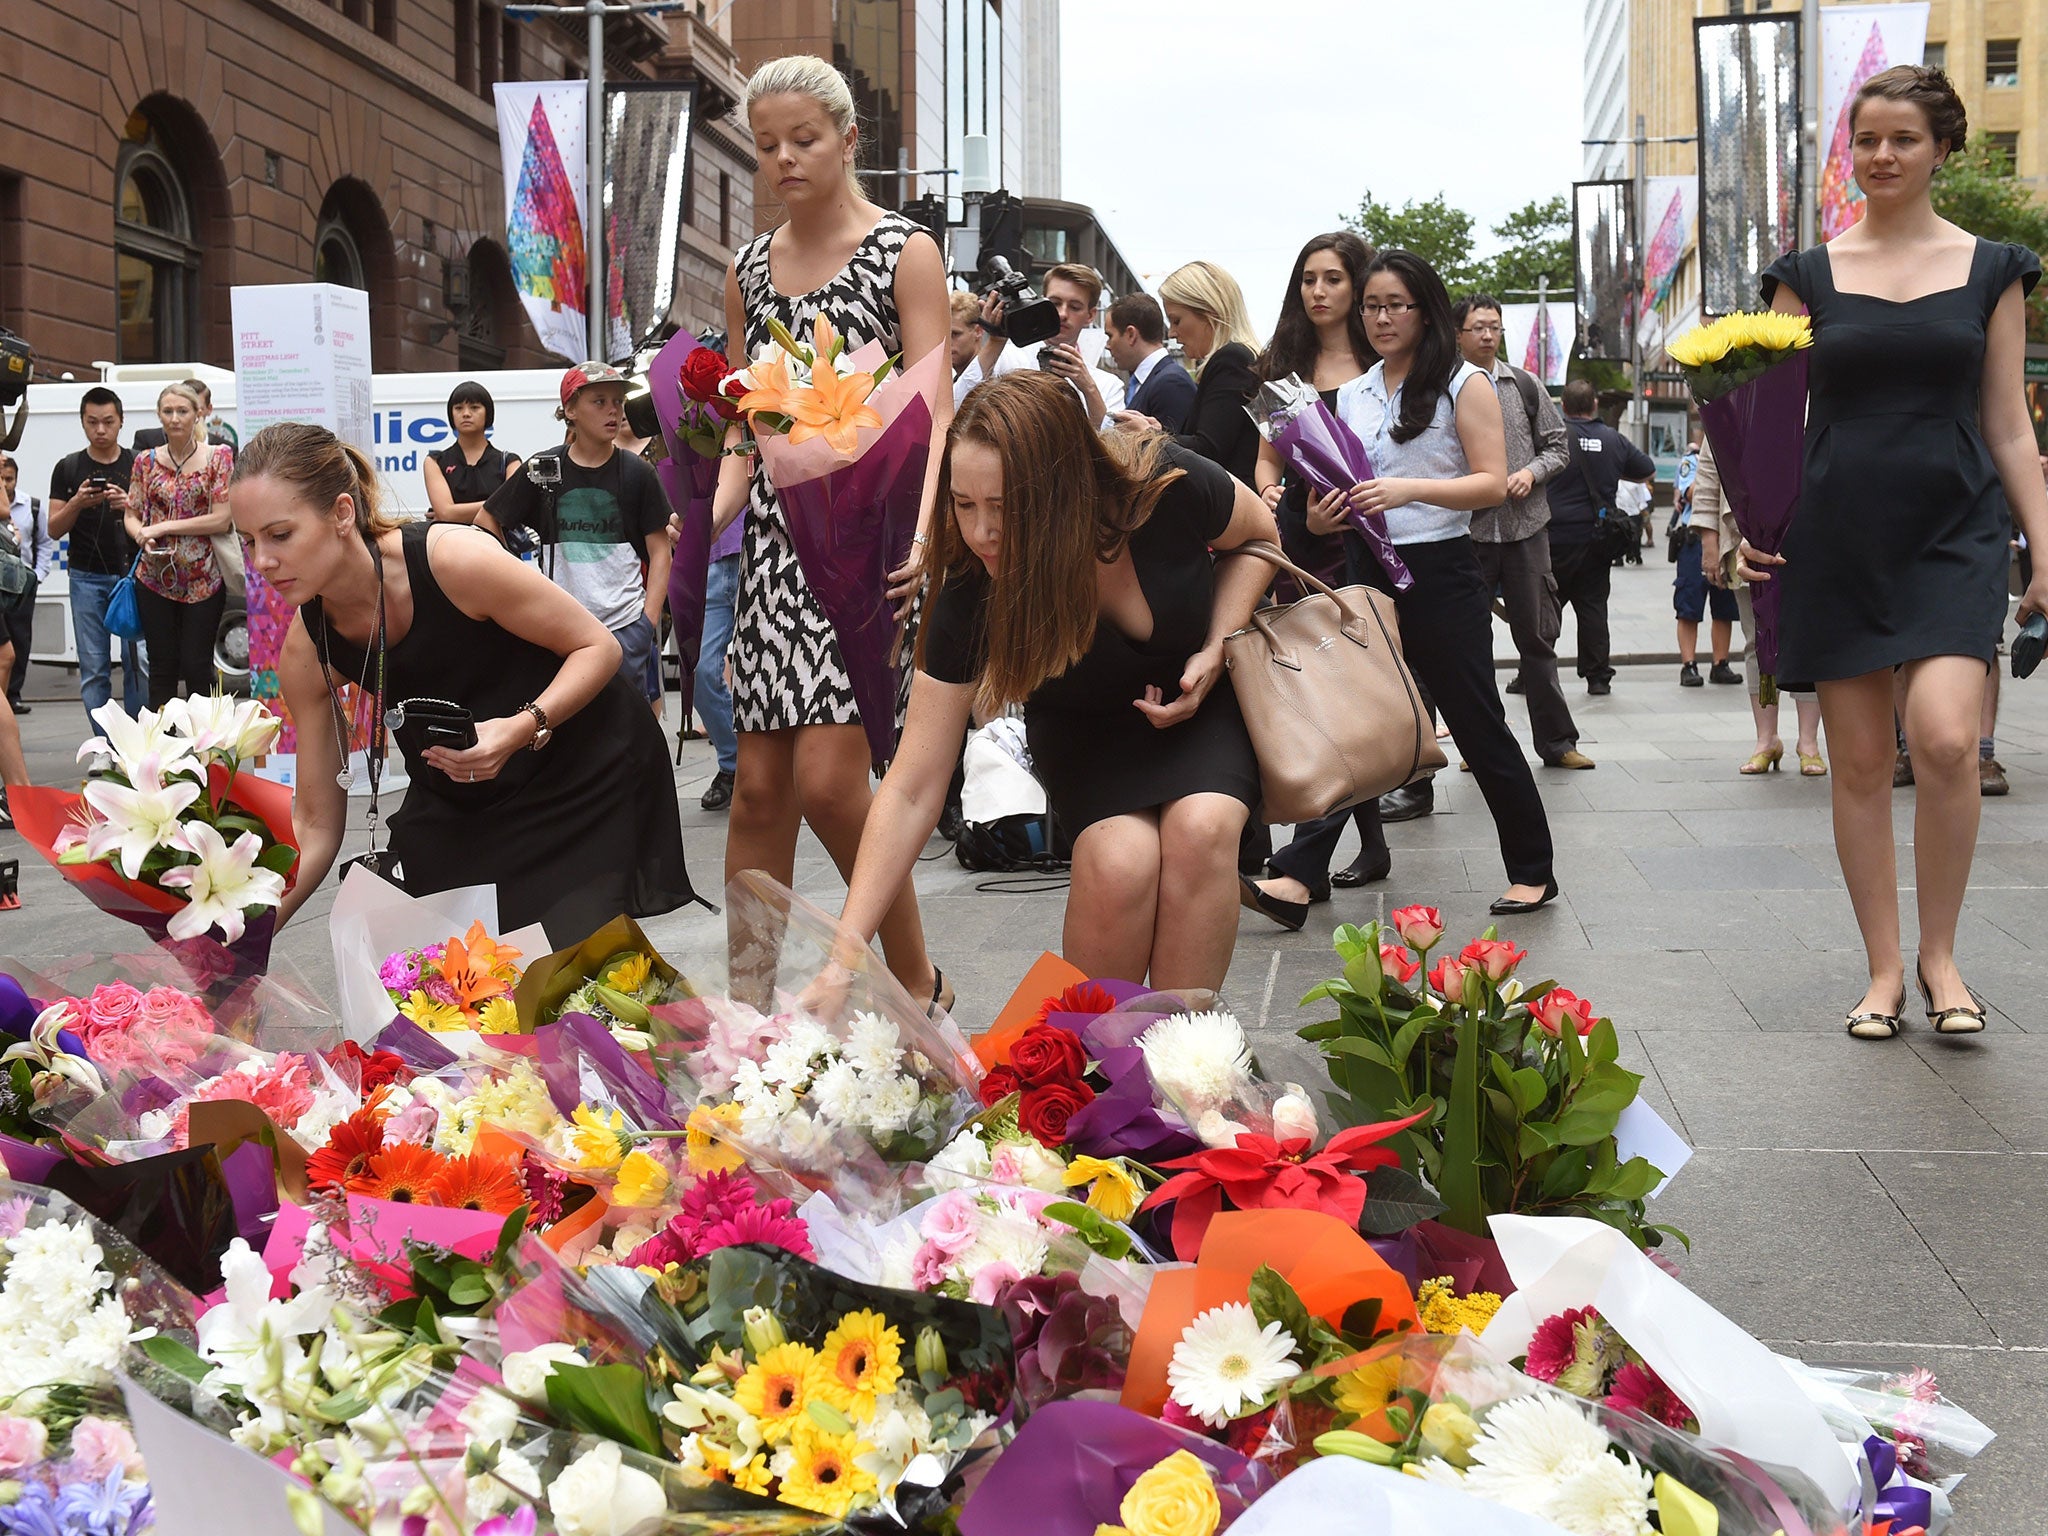 People lay flowers at a floral memorial at the scene of Sydney's siege